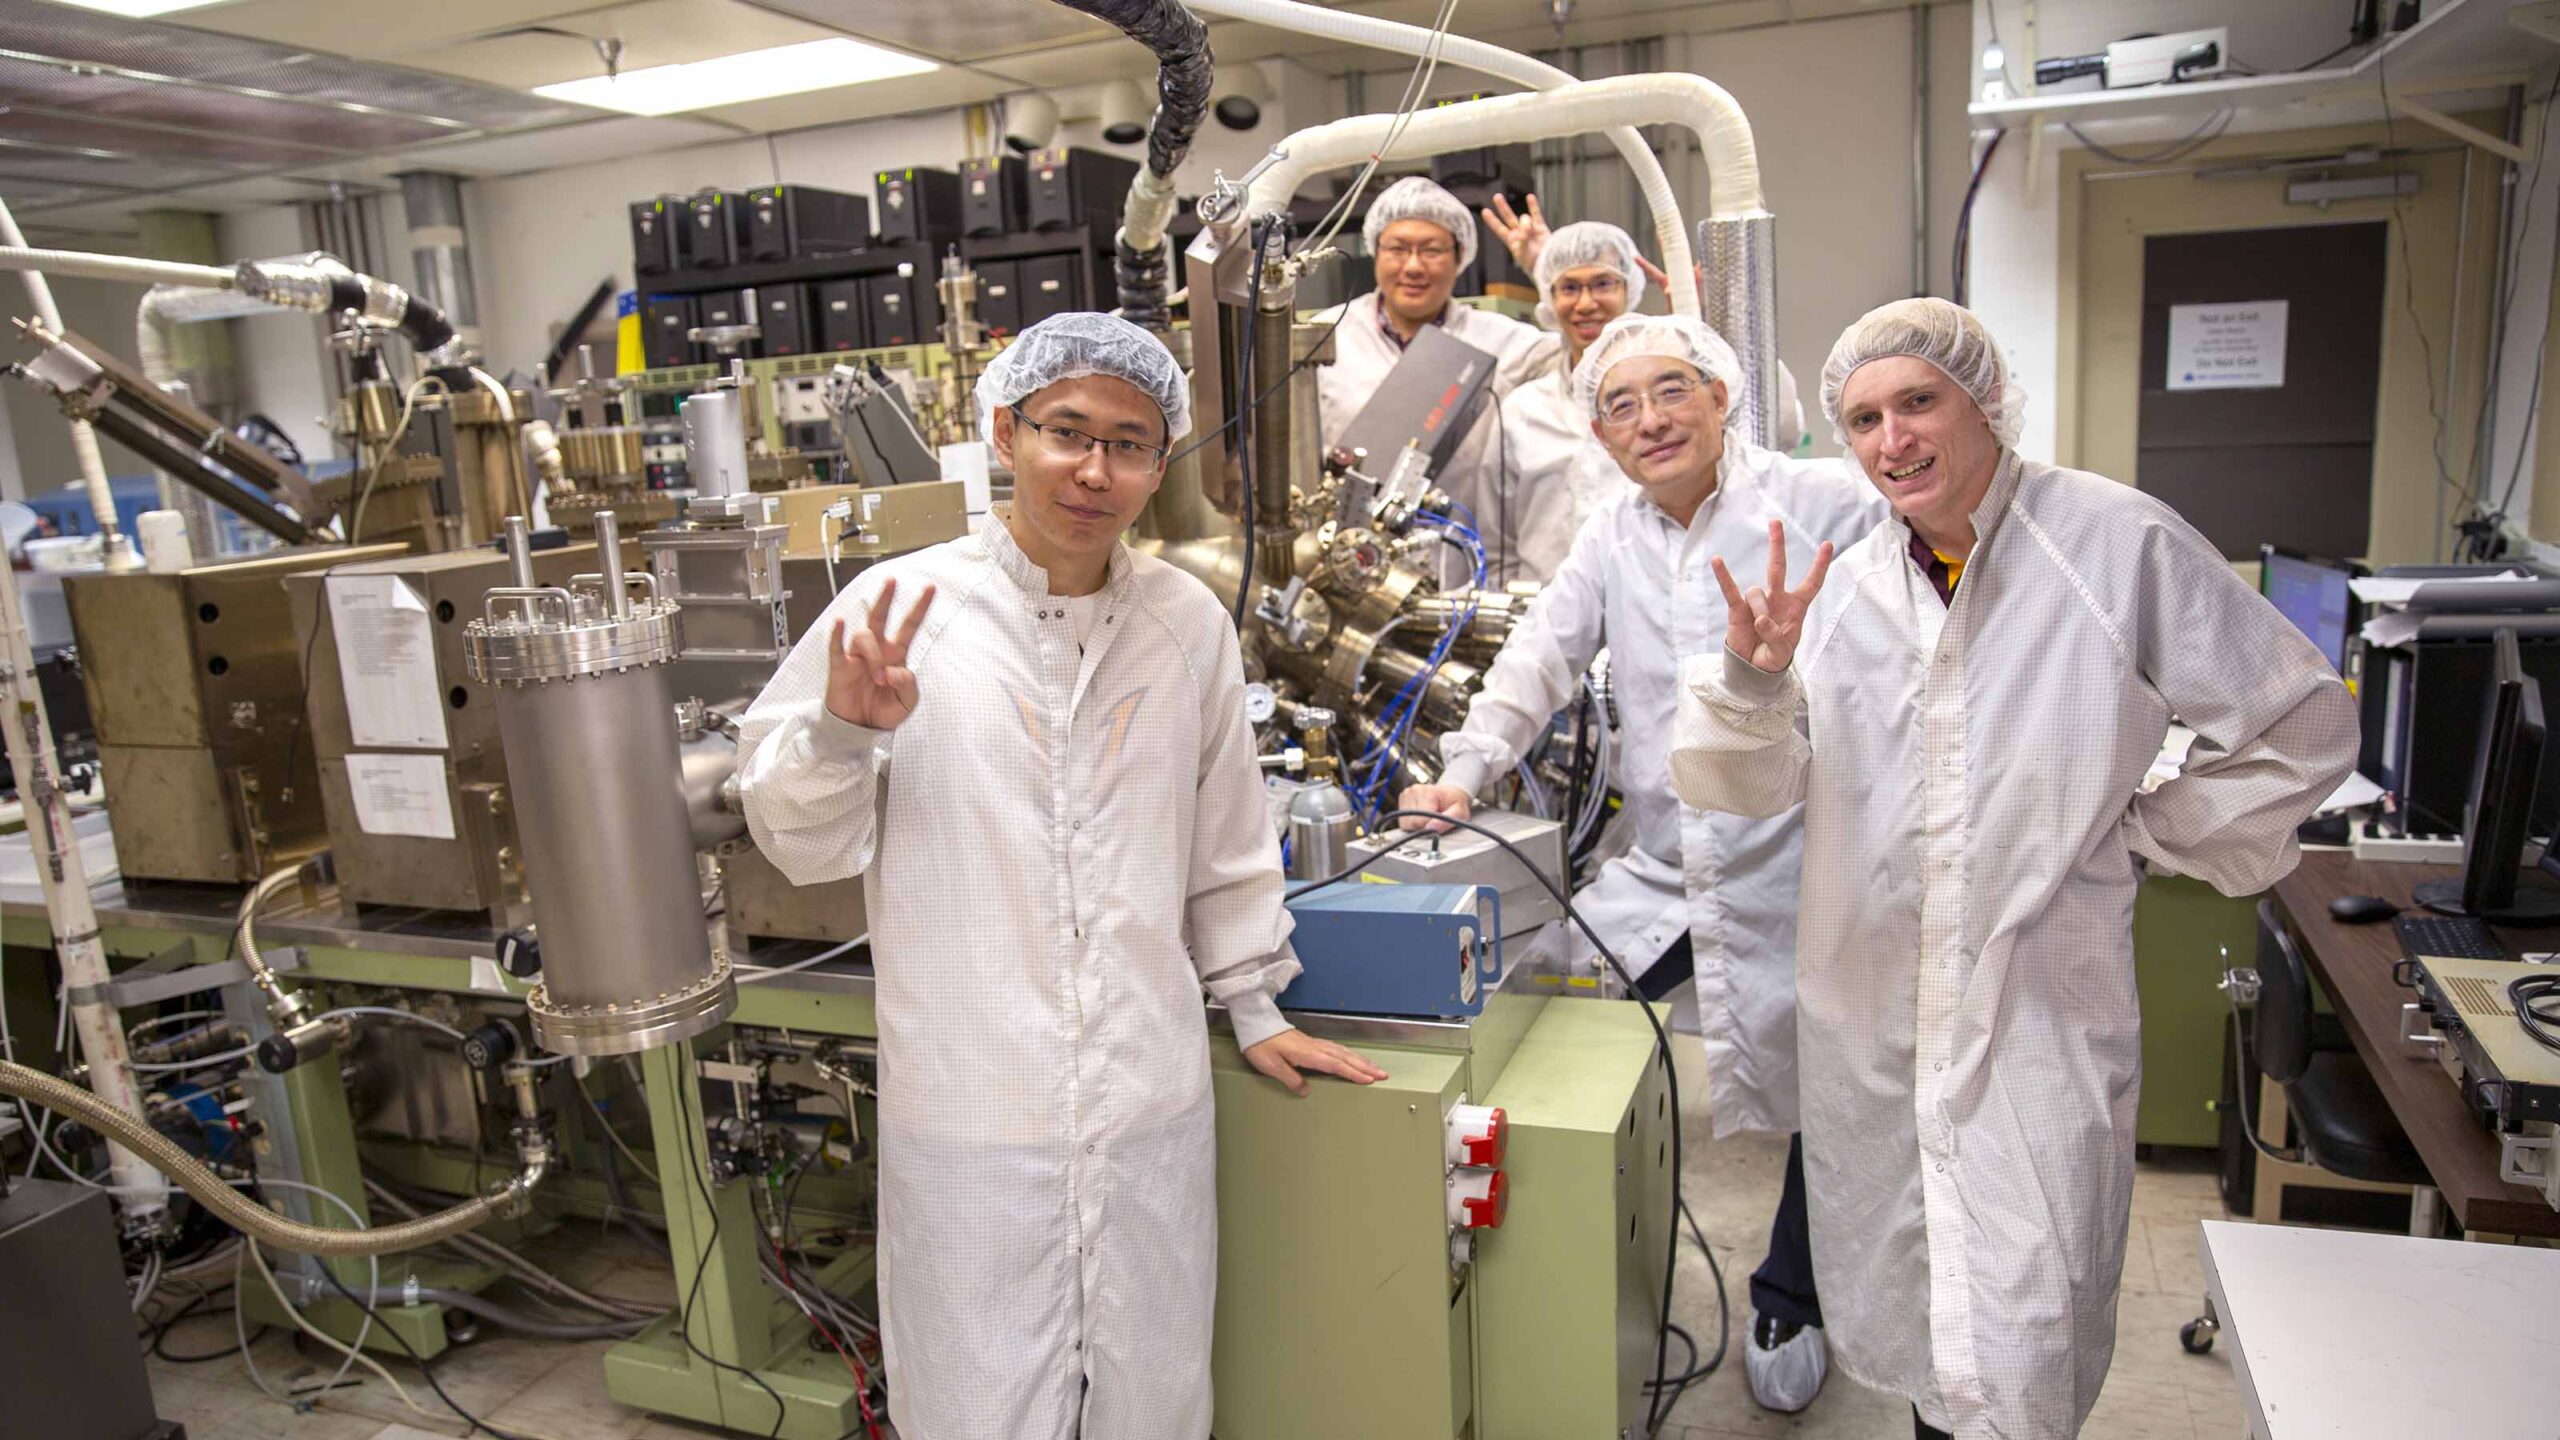 Yong Hang Zhang and other researchers in his lab